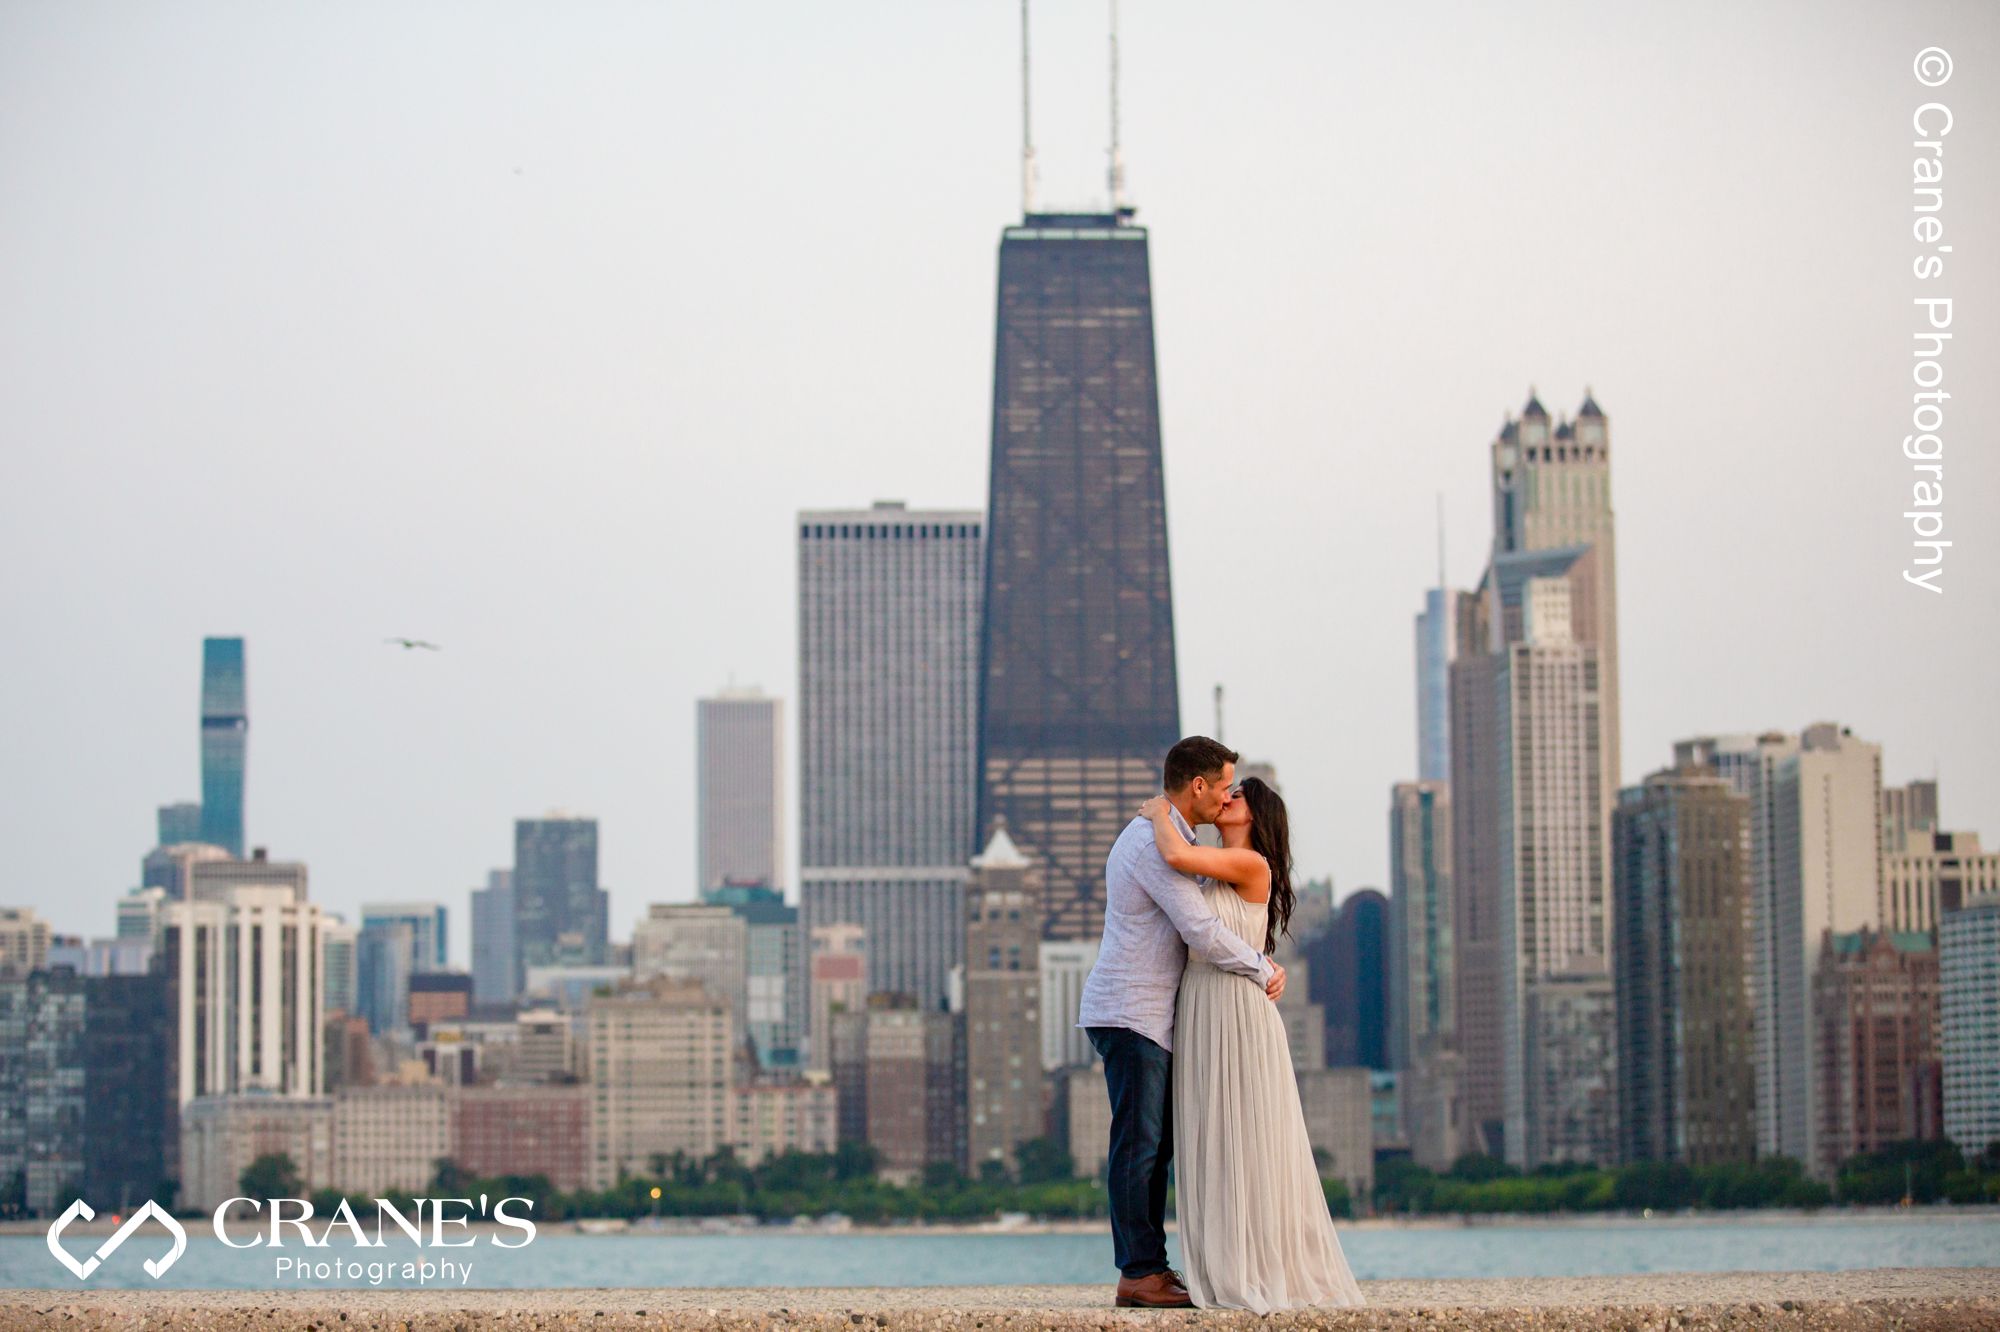 An iconic North Ave Beach engagement session with the Chicago skyline in the background